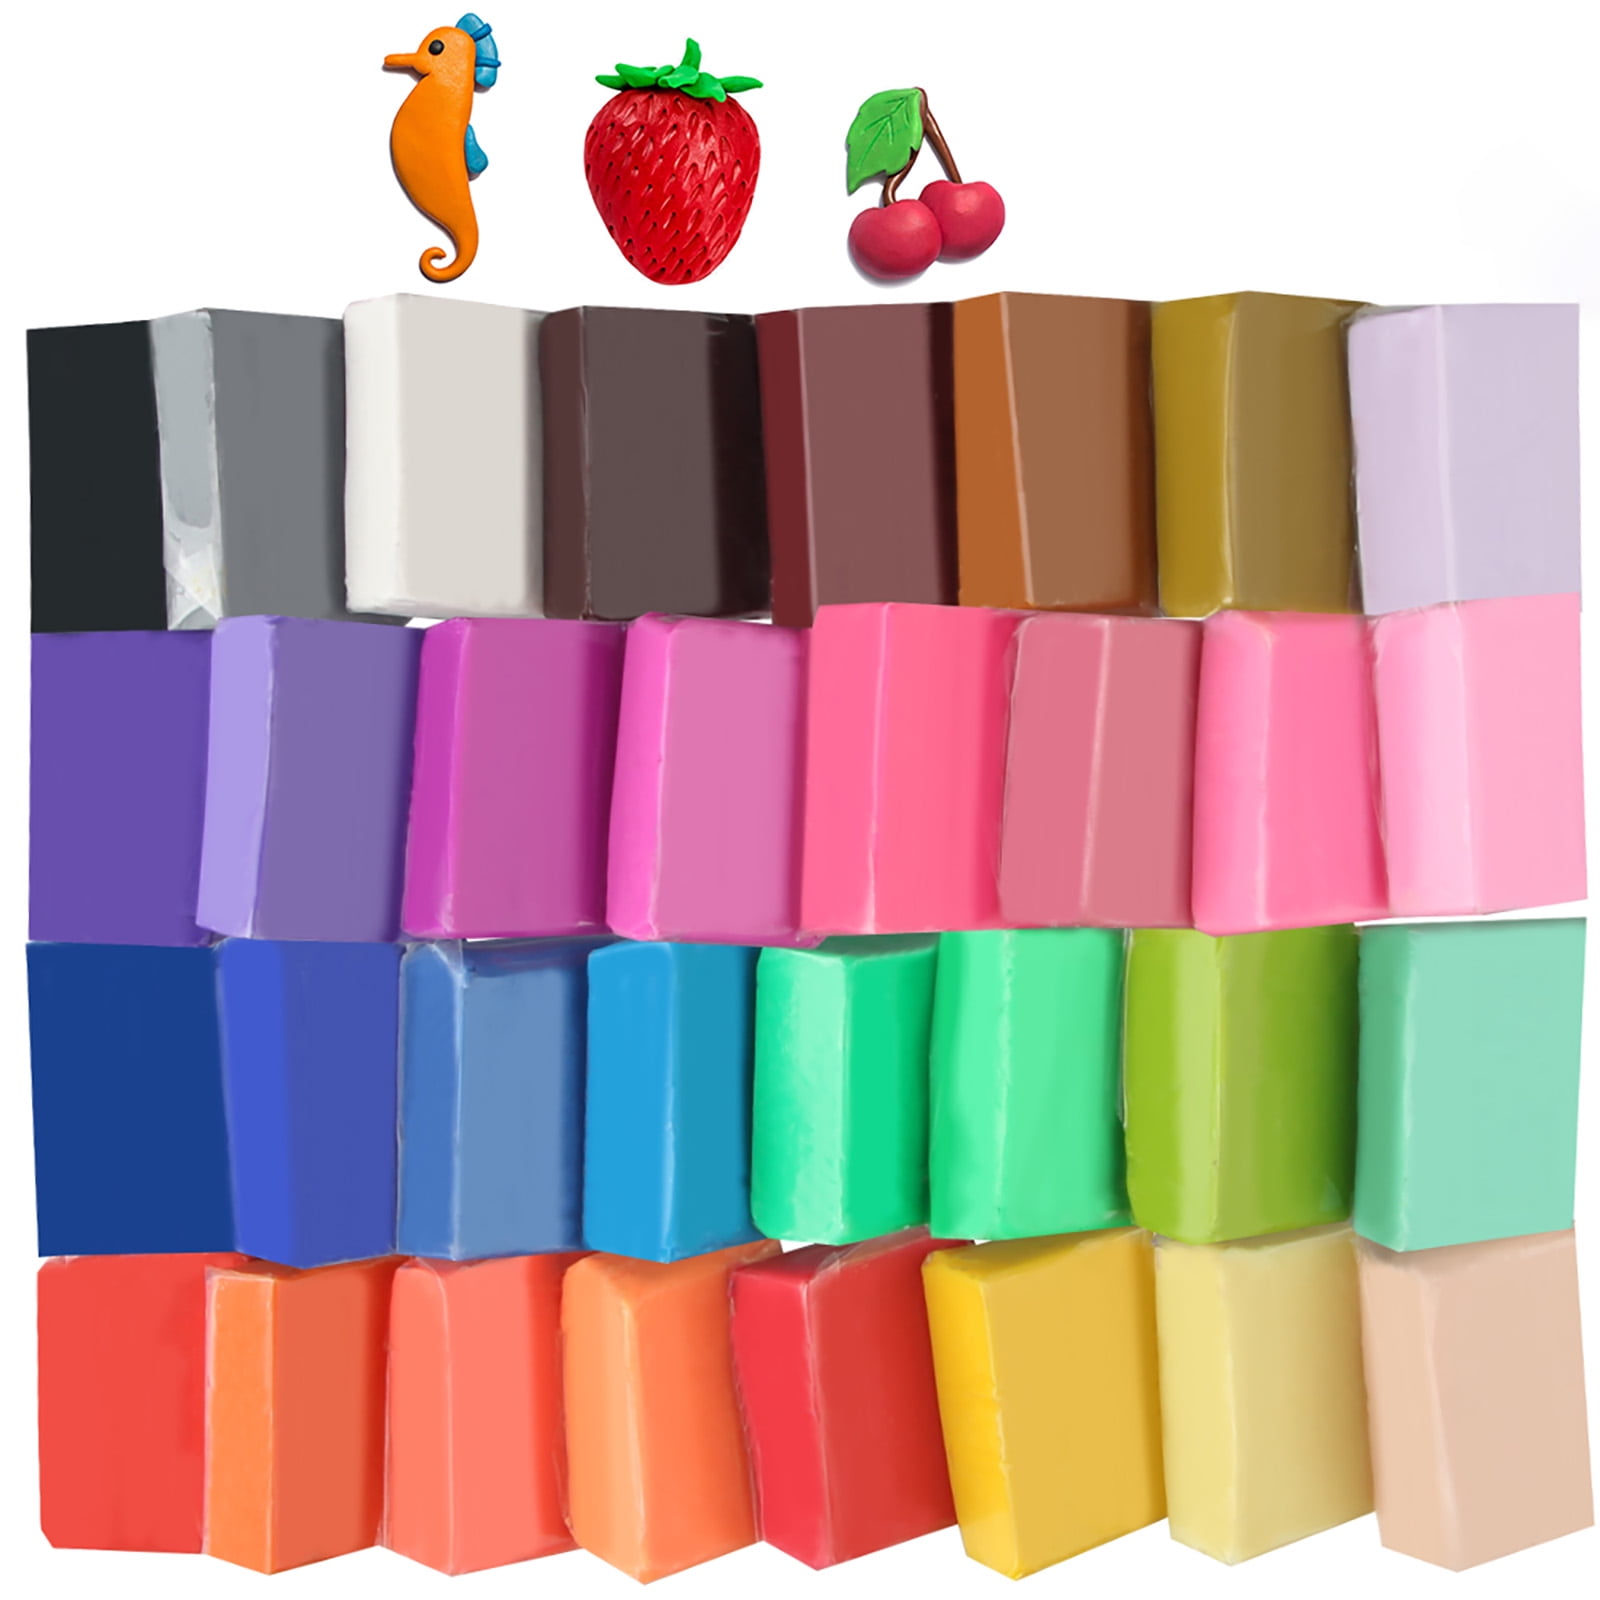 Polymer Clay 32Colors Modeling Baking Clay DIY Craft Clay Set w